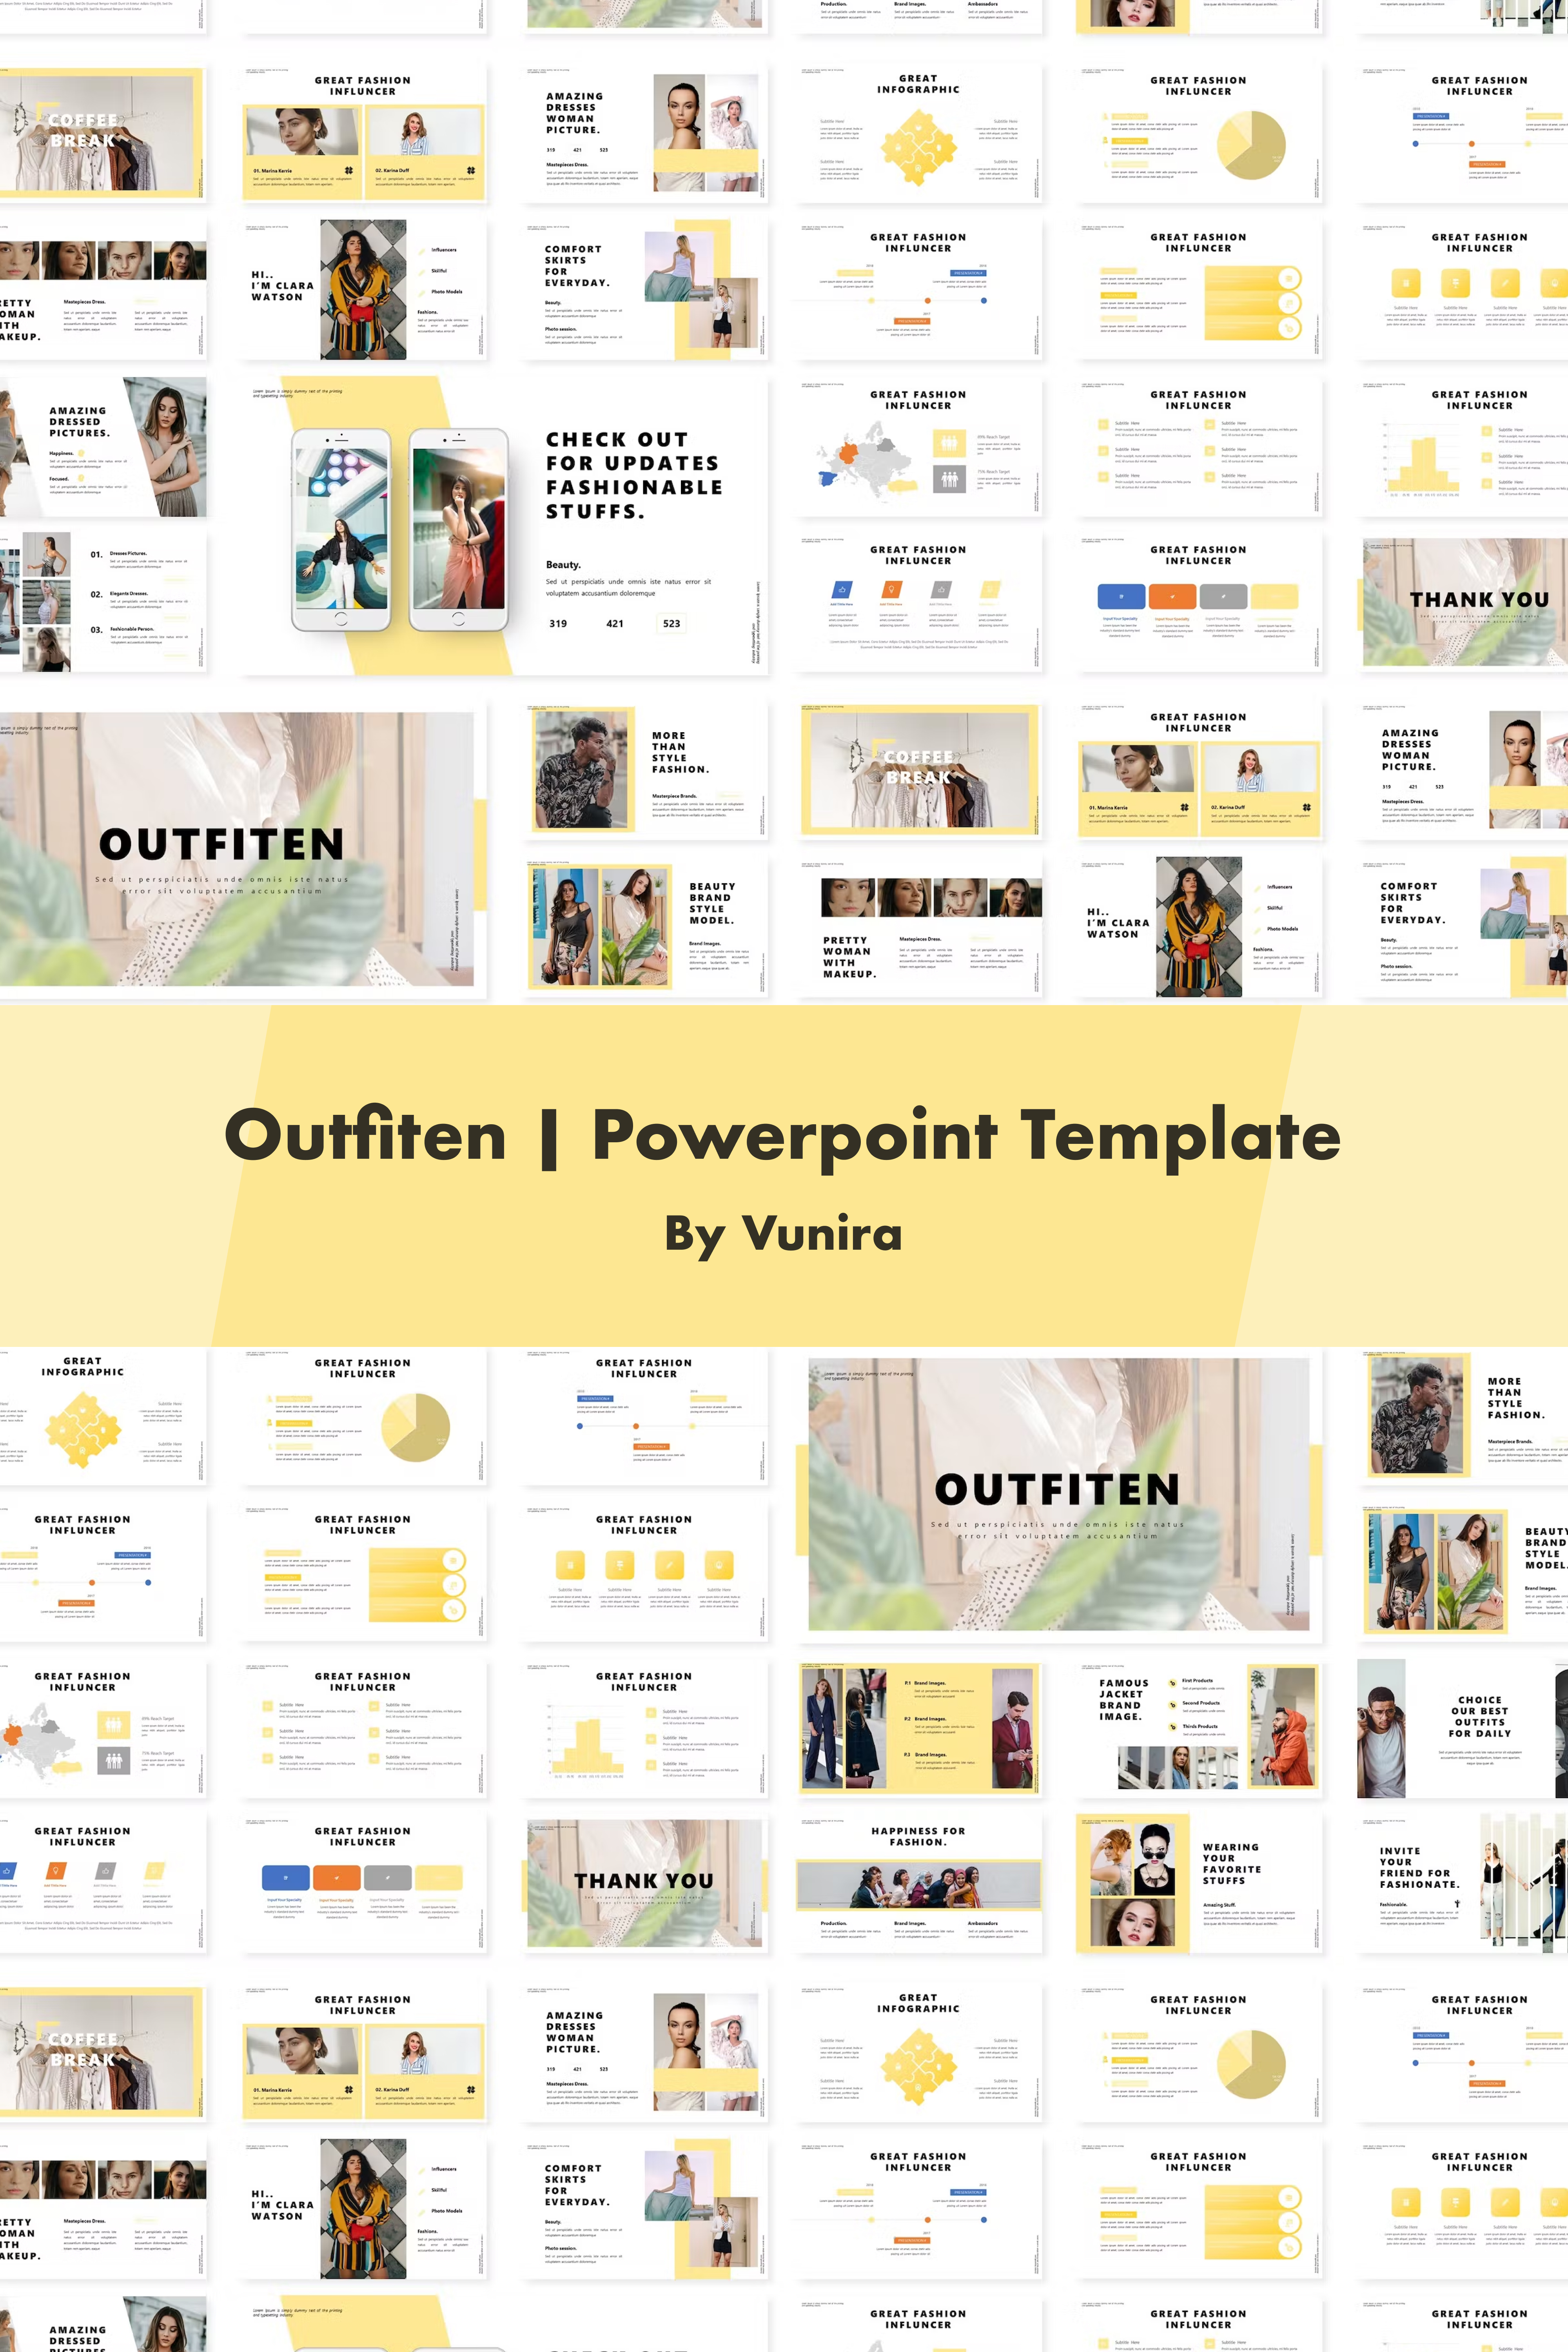 Pinterest of outfiten powerpoint template.